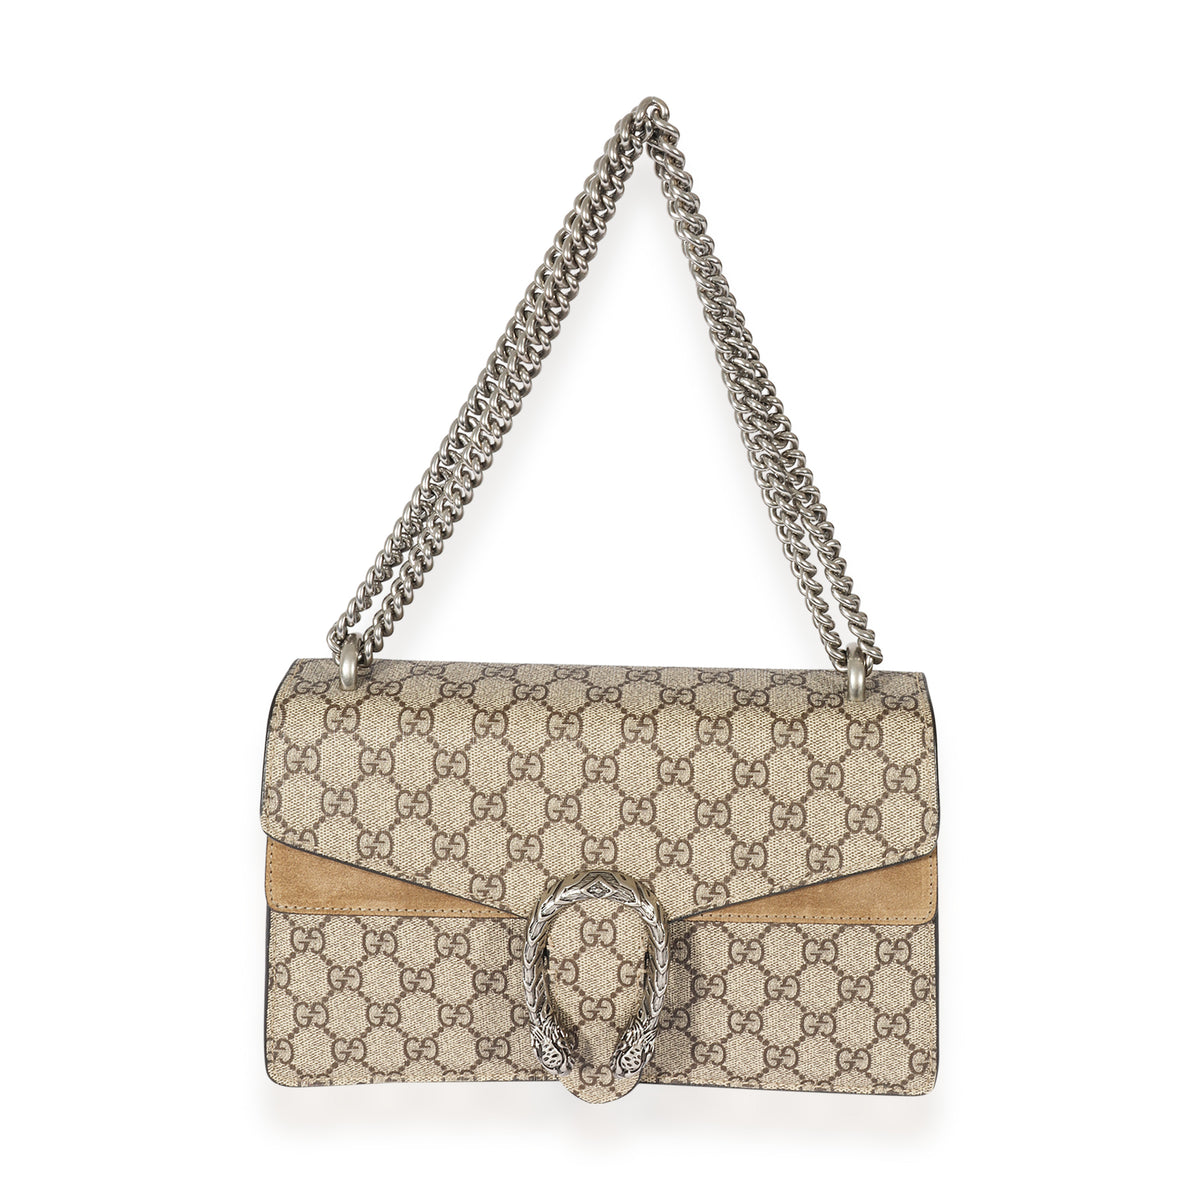 Gucci Dionysus Small GG Bag Beige/White in GG Supreme Canvas with